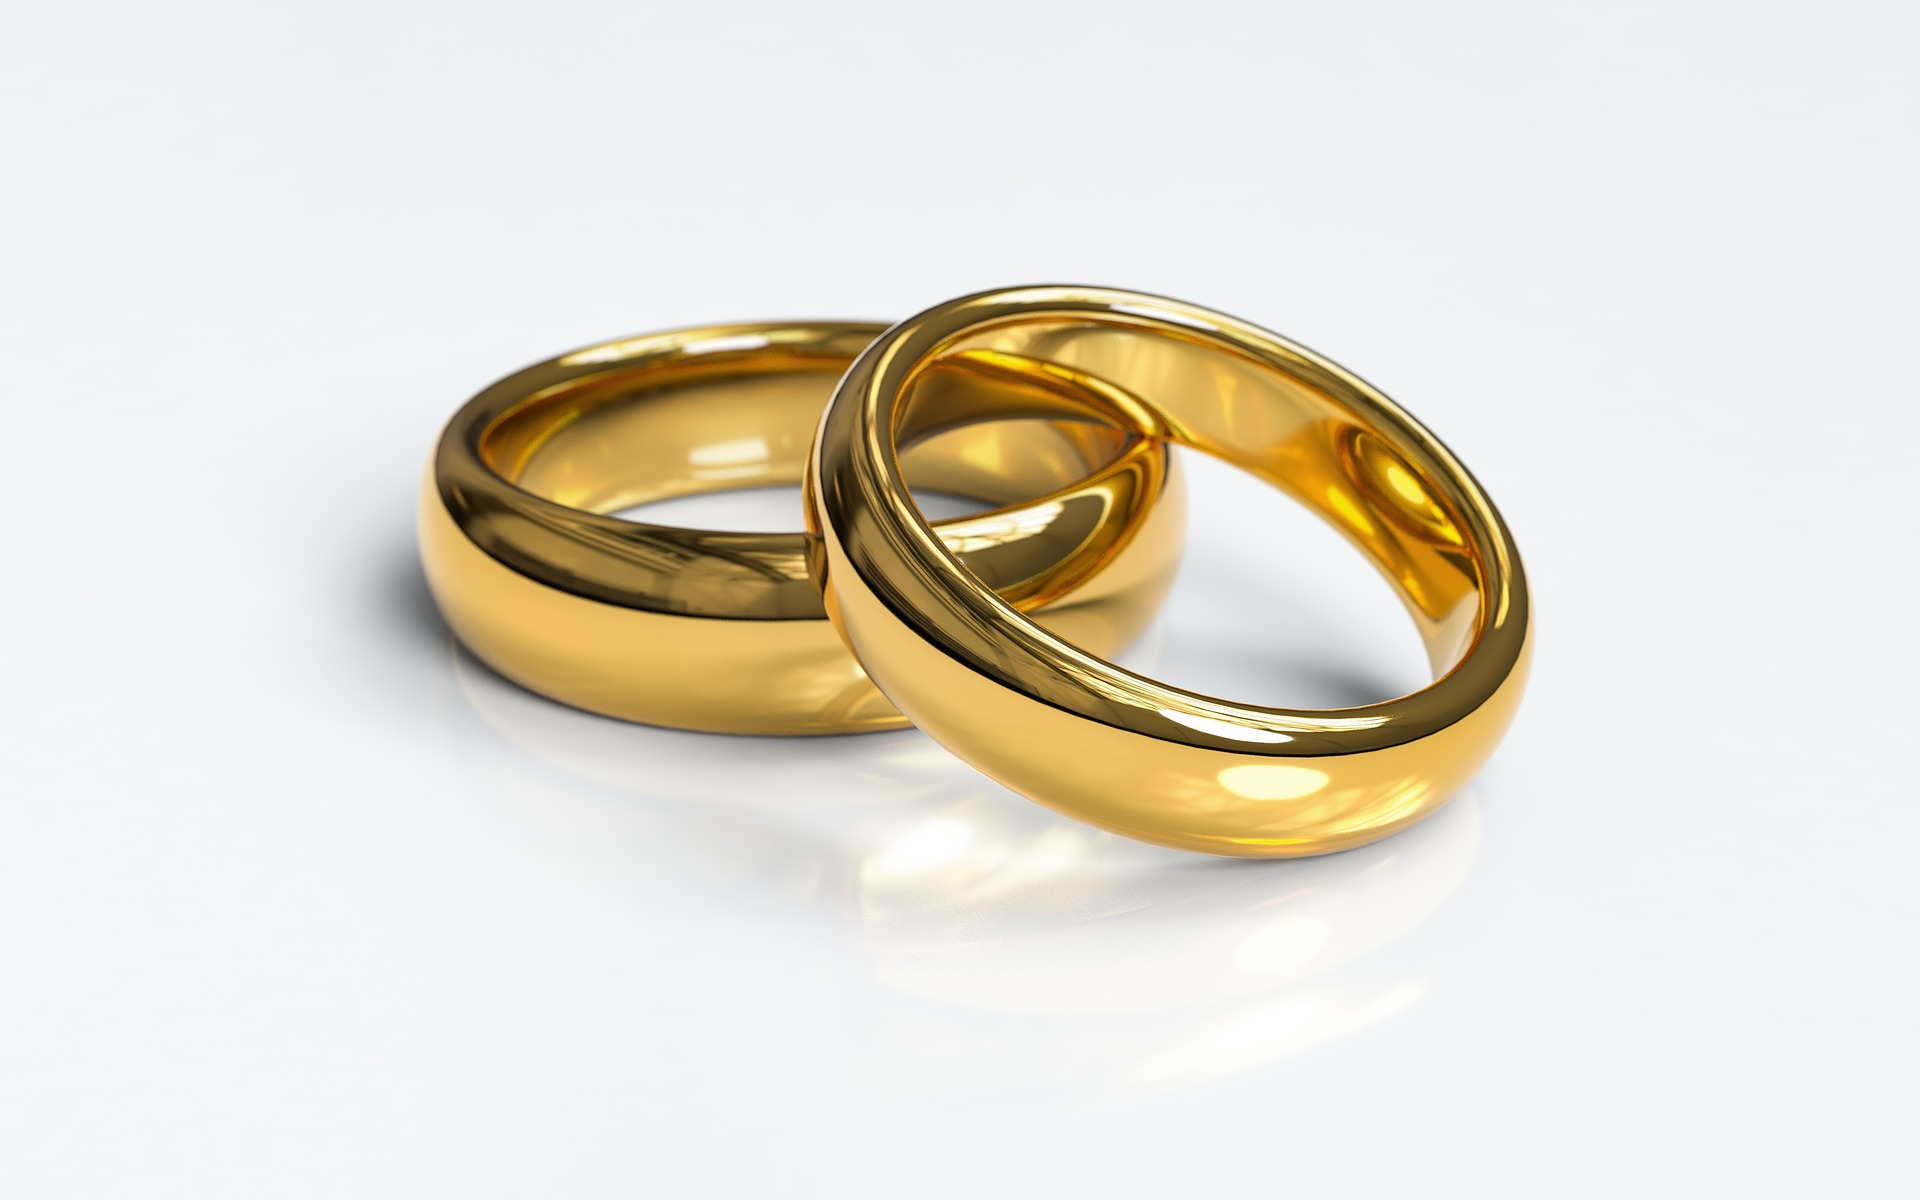 A pair of golden rings